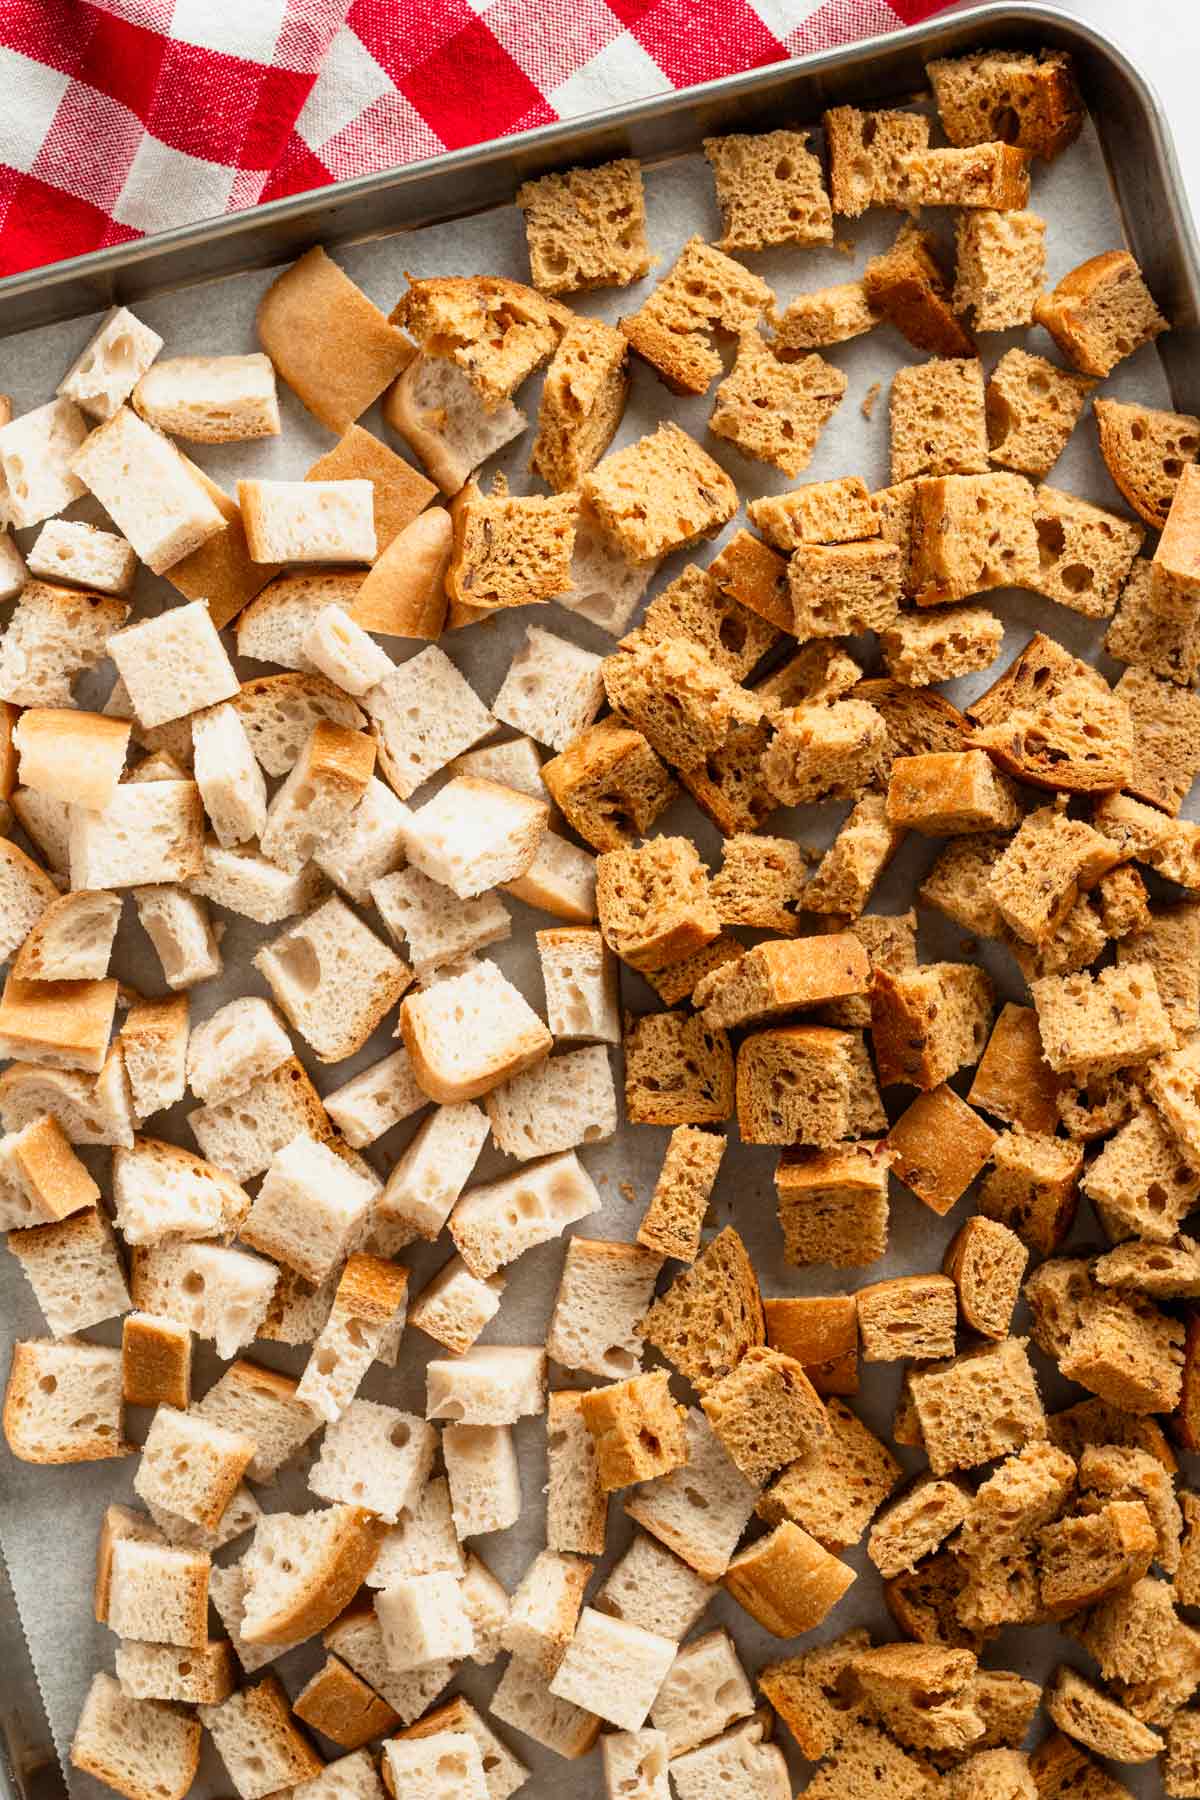 two types of bread cubes on baking sheet.